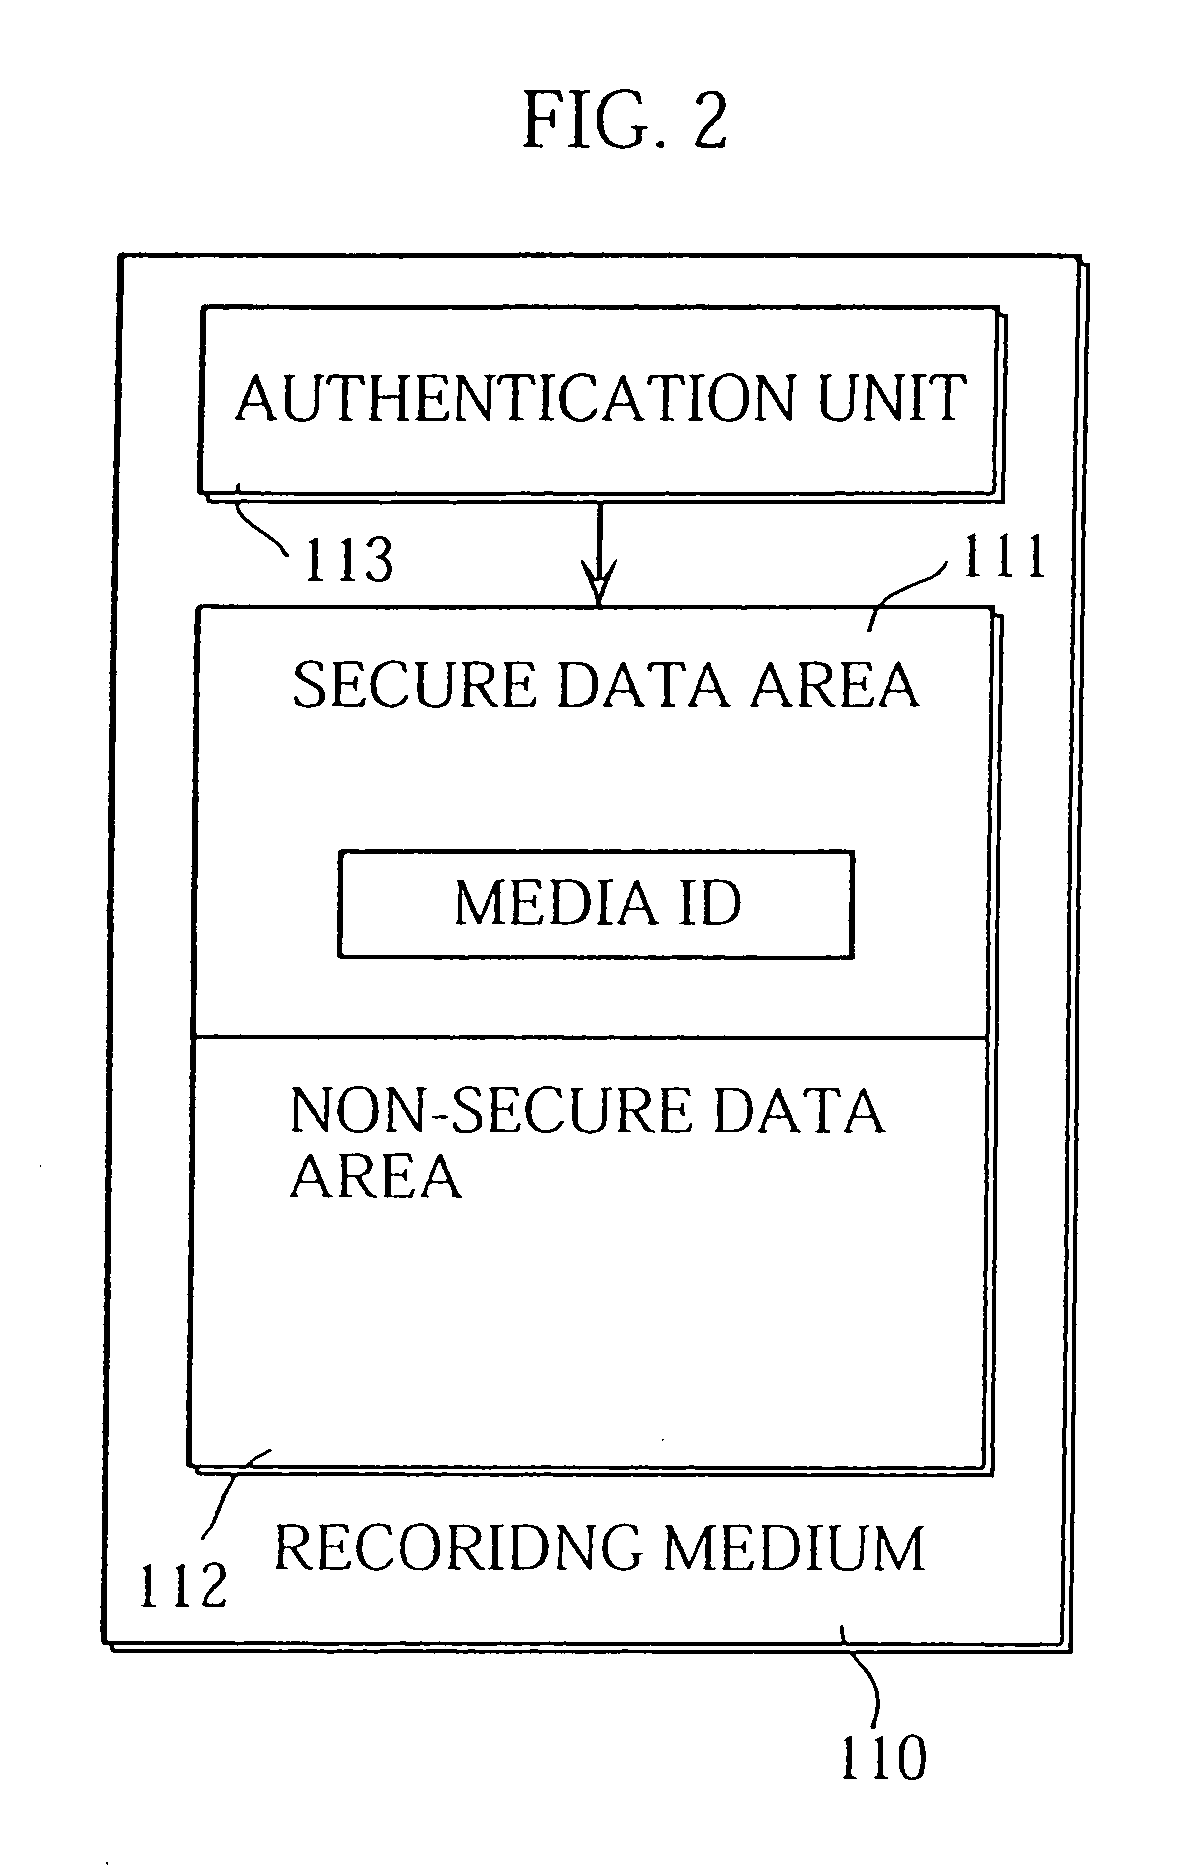 Service providing apparatus and method that allow an apparatus to access unique information stored in transportable recording medium